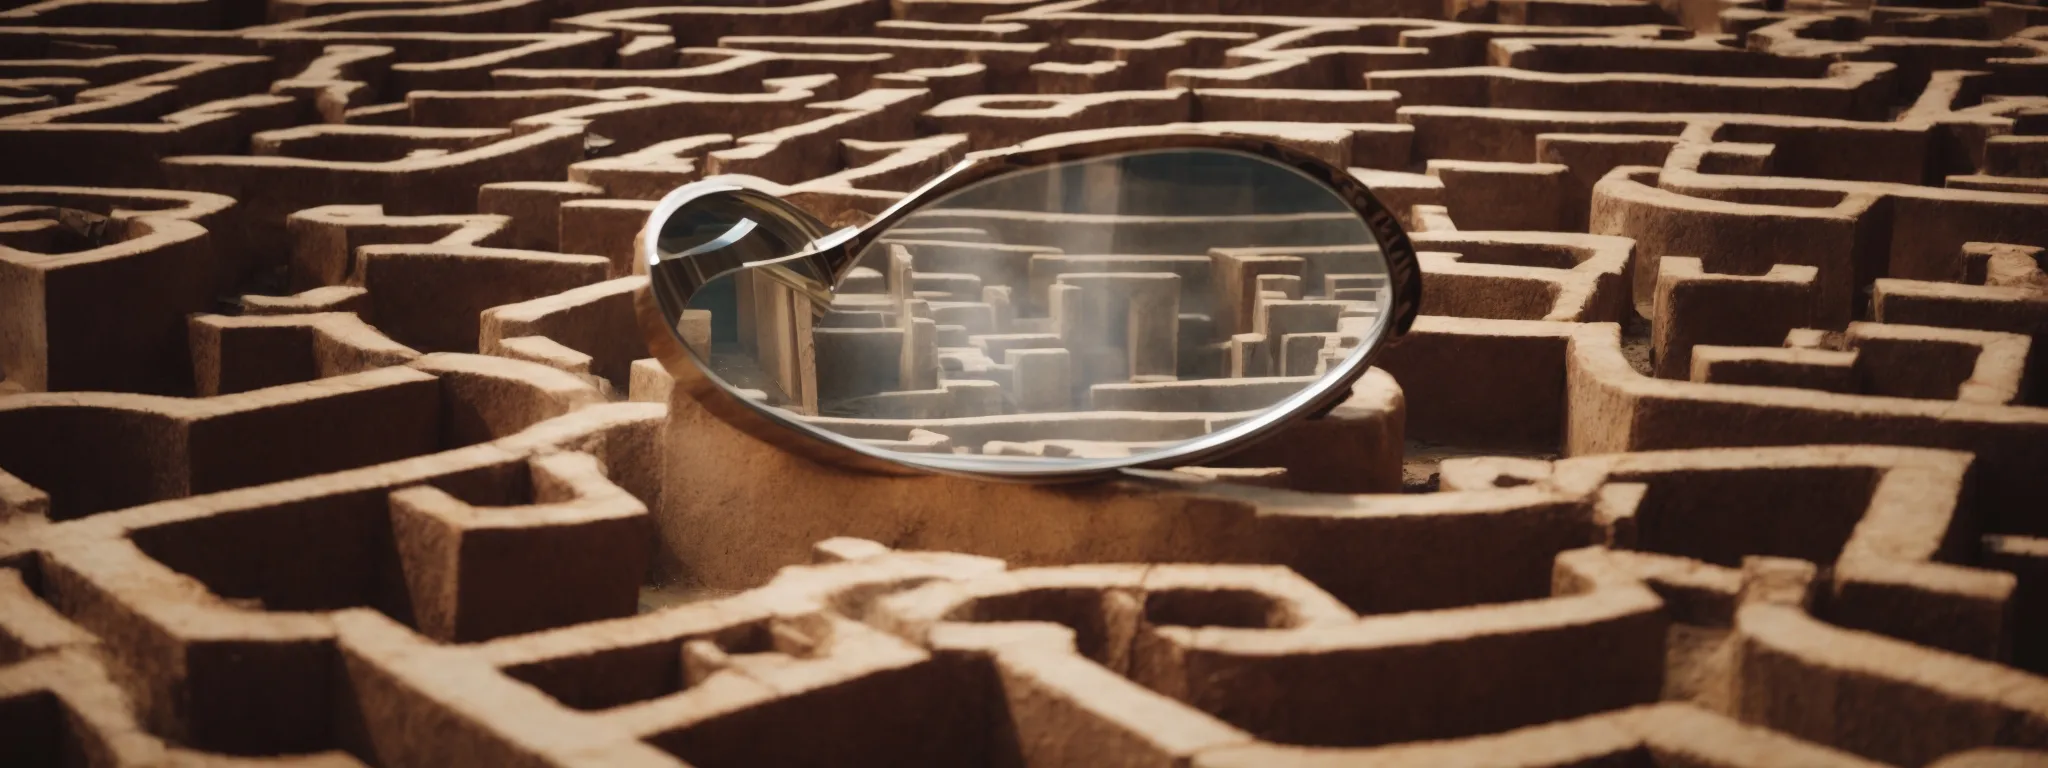 a magnifying glass hovers over a complex labyrinth, symbolizing the scrutiny of seo guarantees.